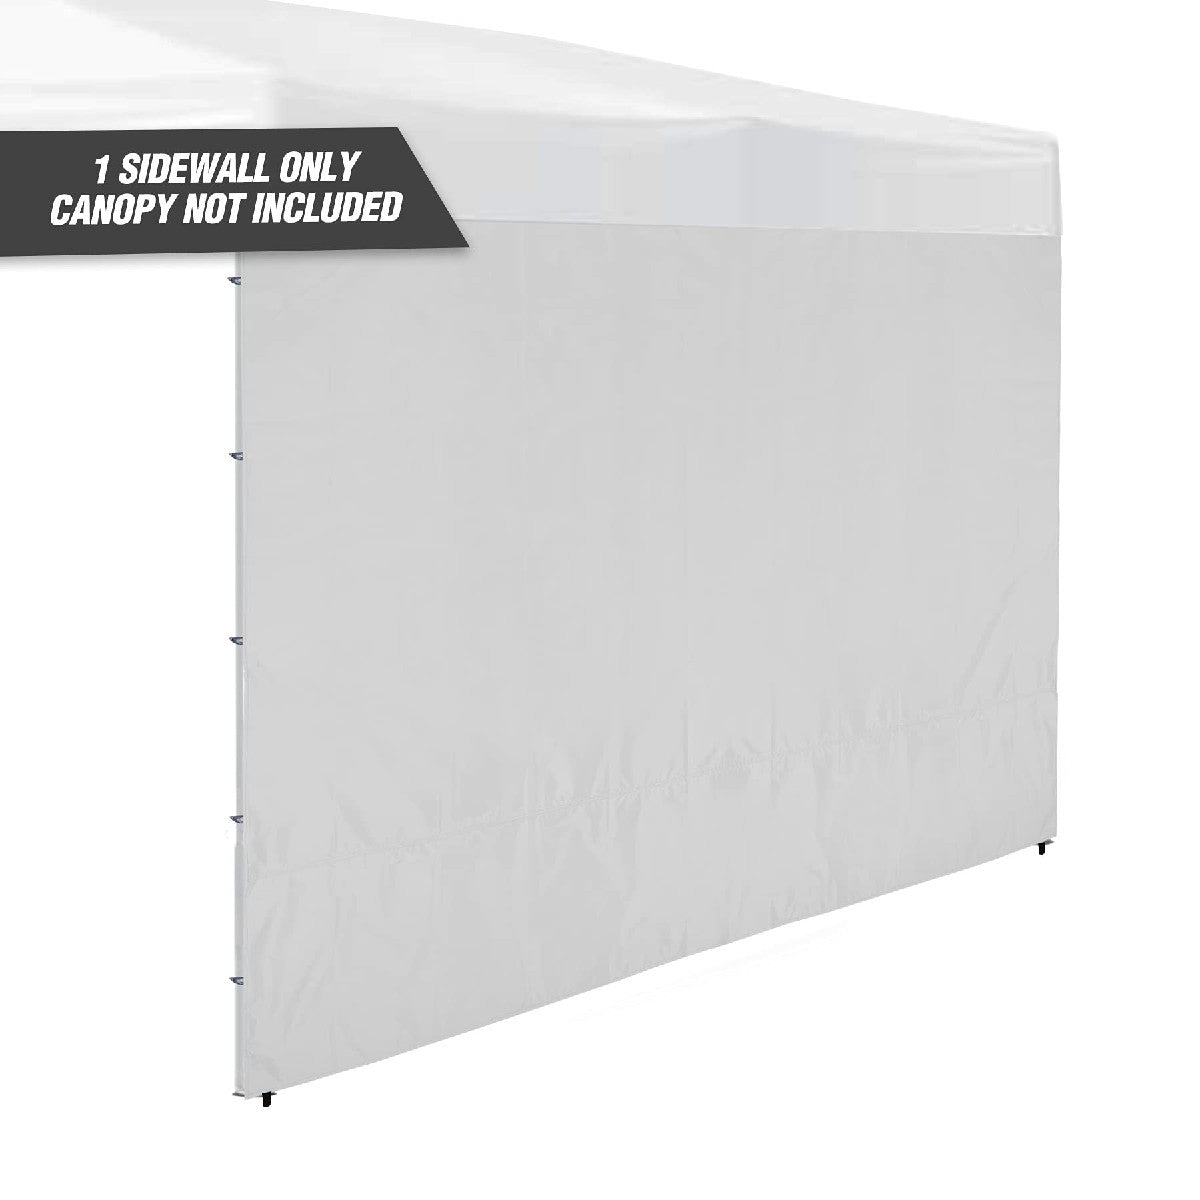 Instant Canopy Sidewall for 10x10ft Pop Up Canopy